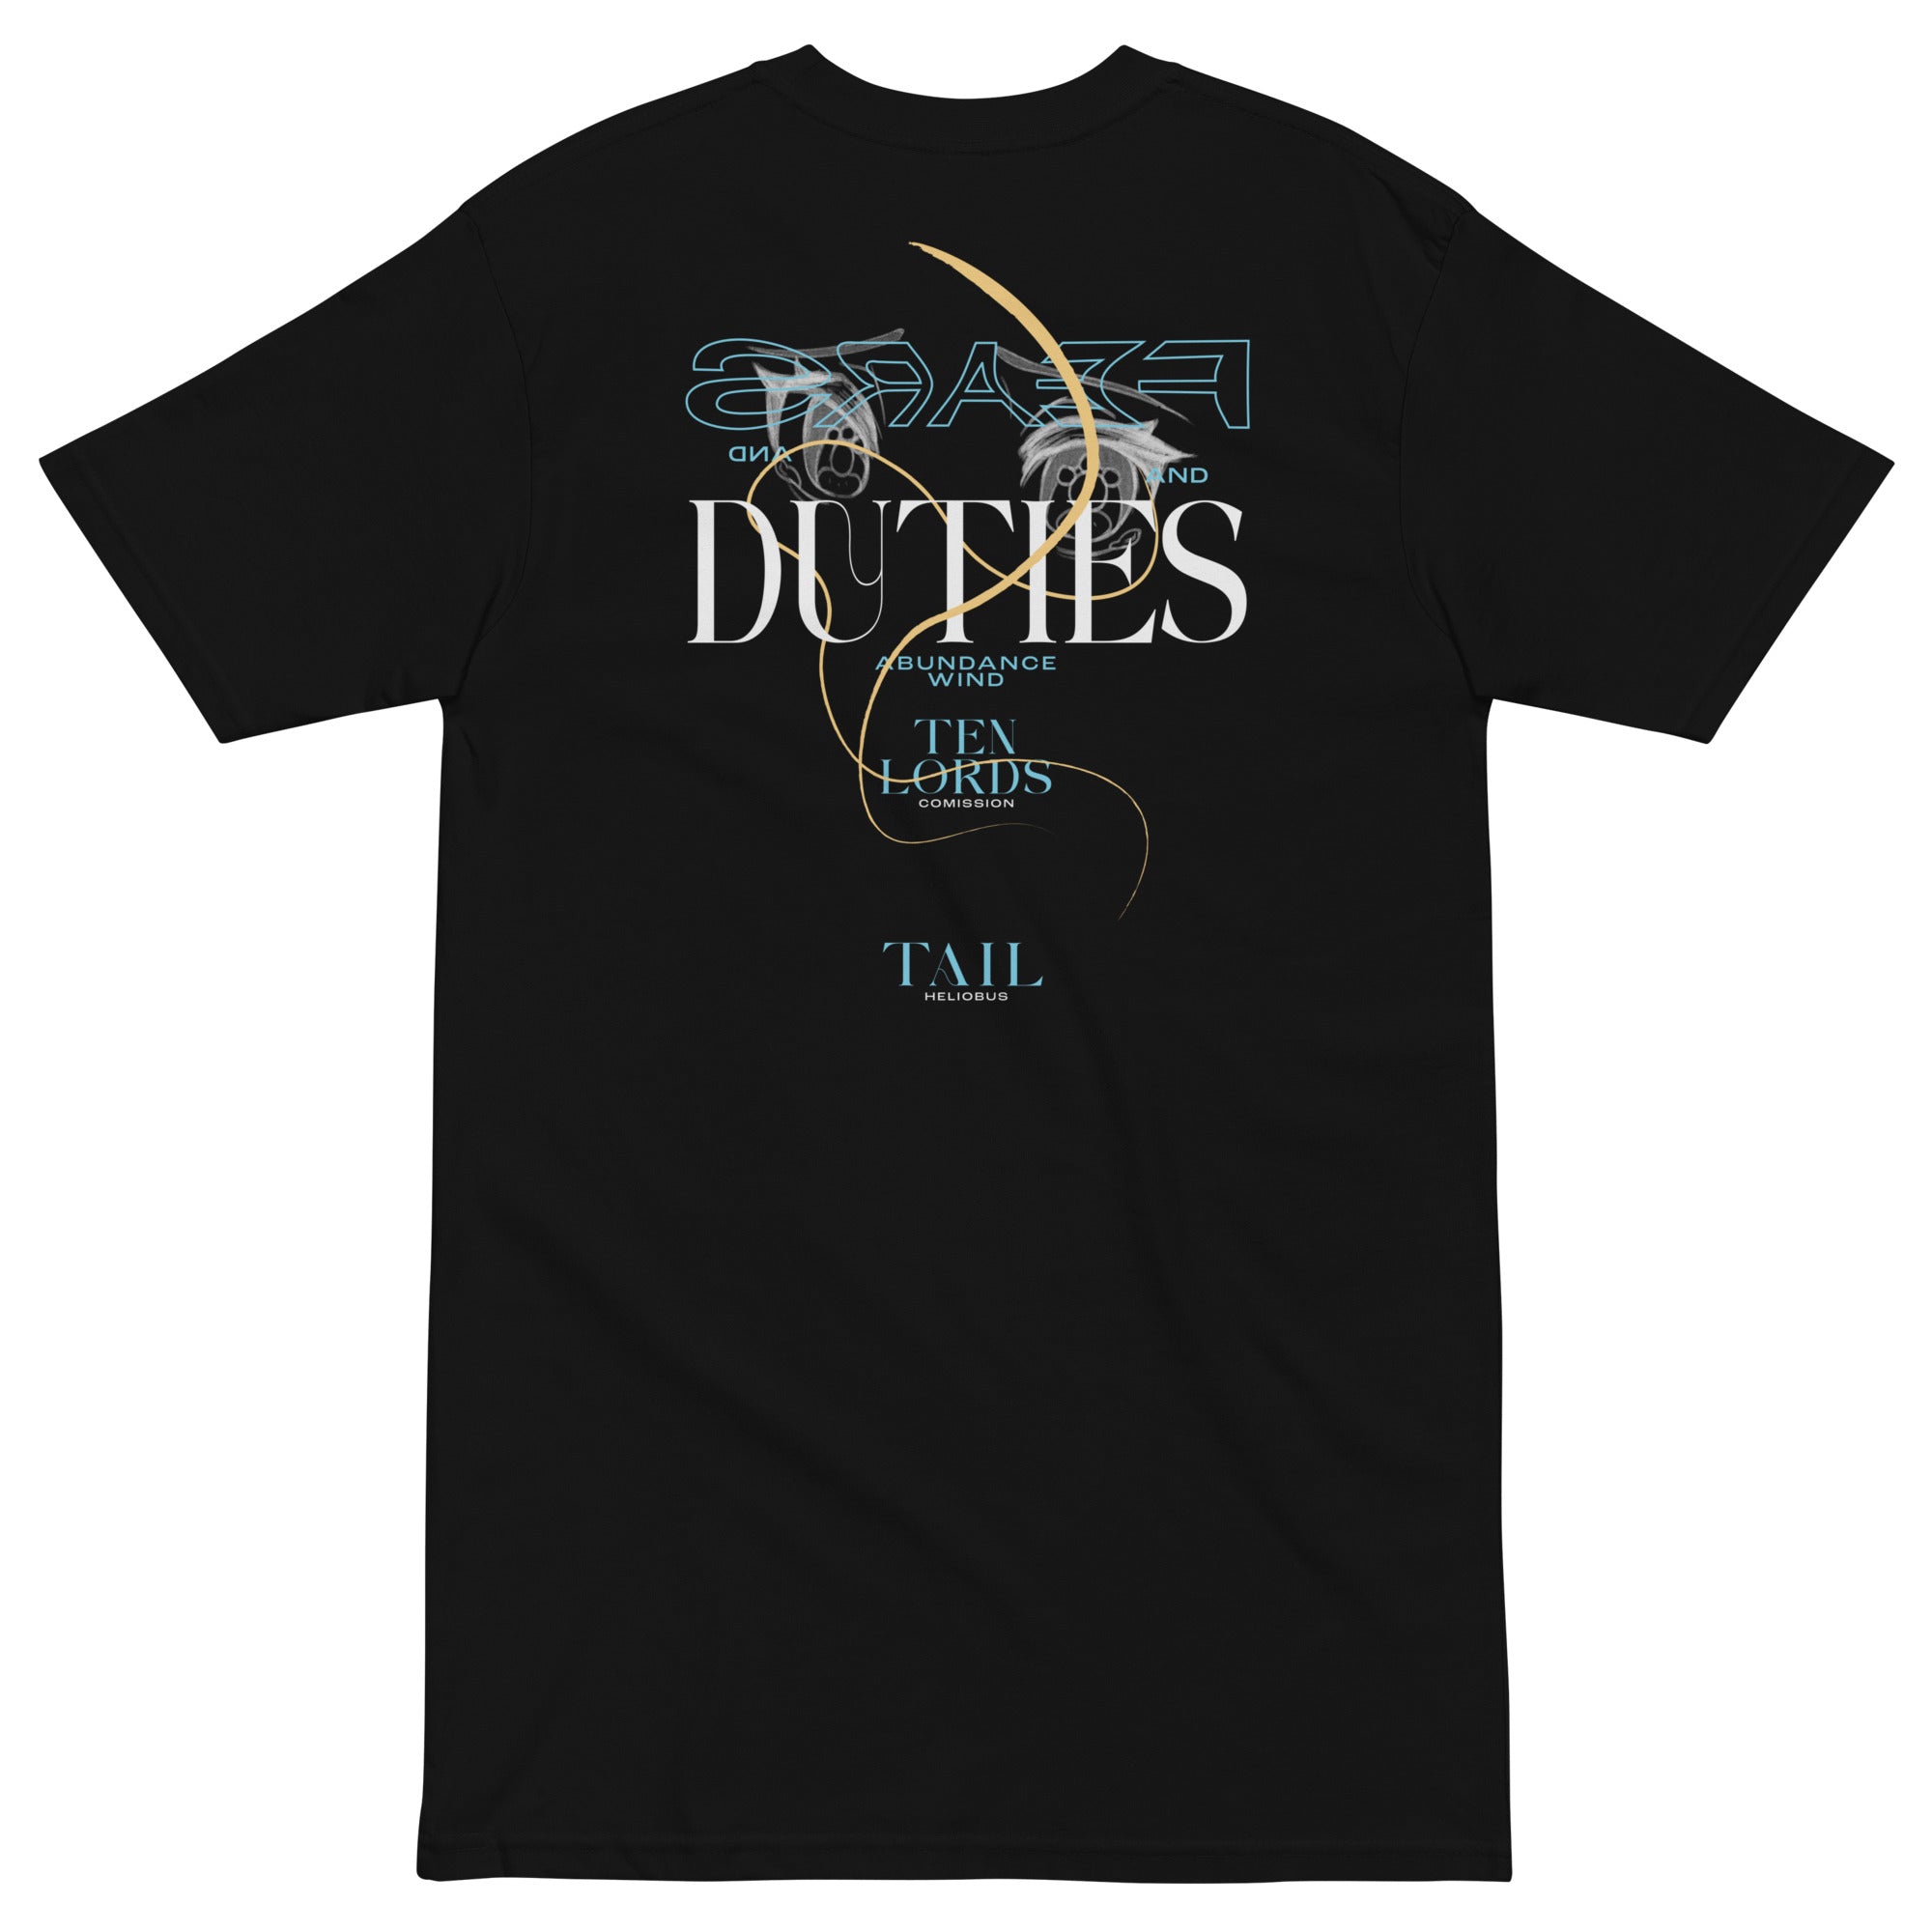 FEARS AND DUTIES • t-shirt - Jackler - anime-inspired streetwear - anime clothing